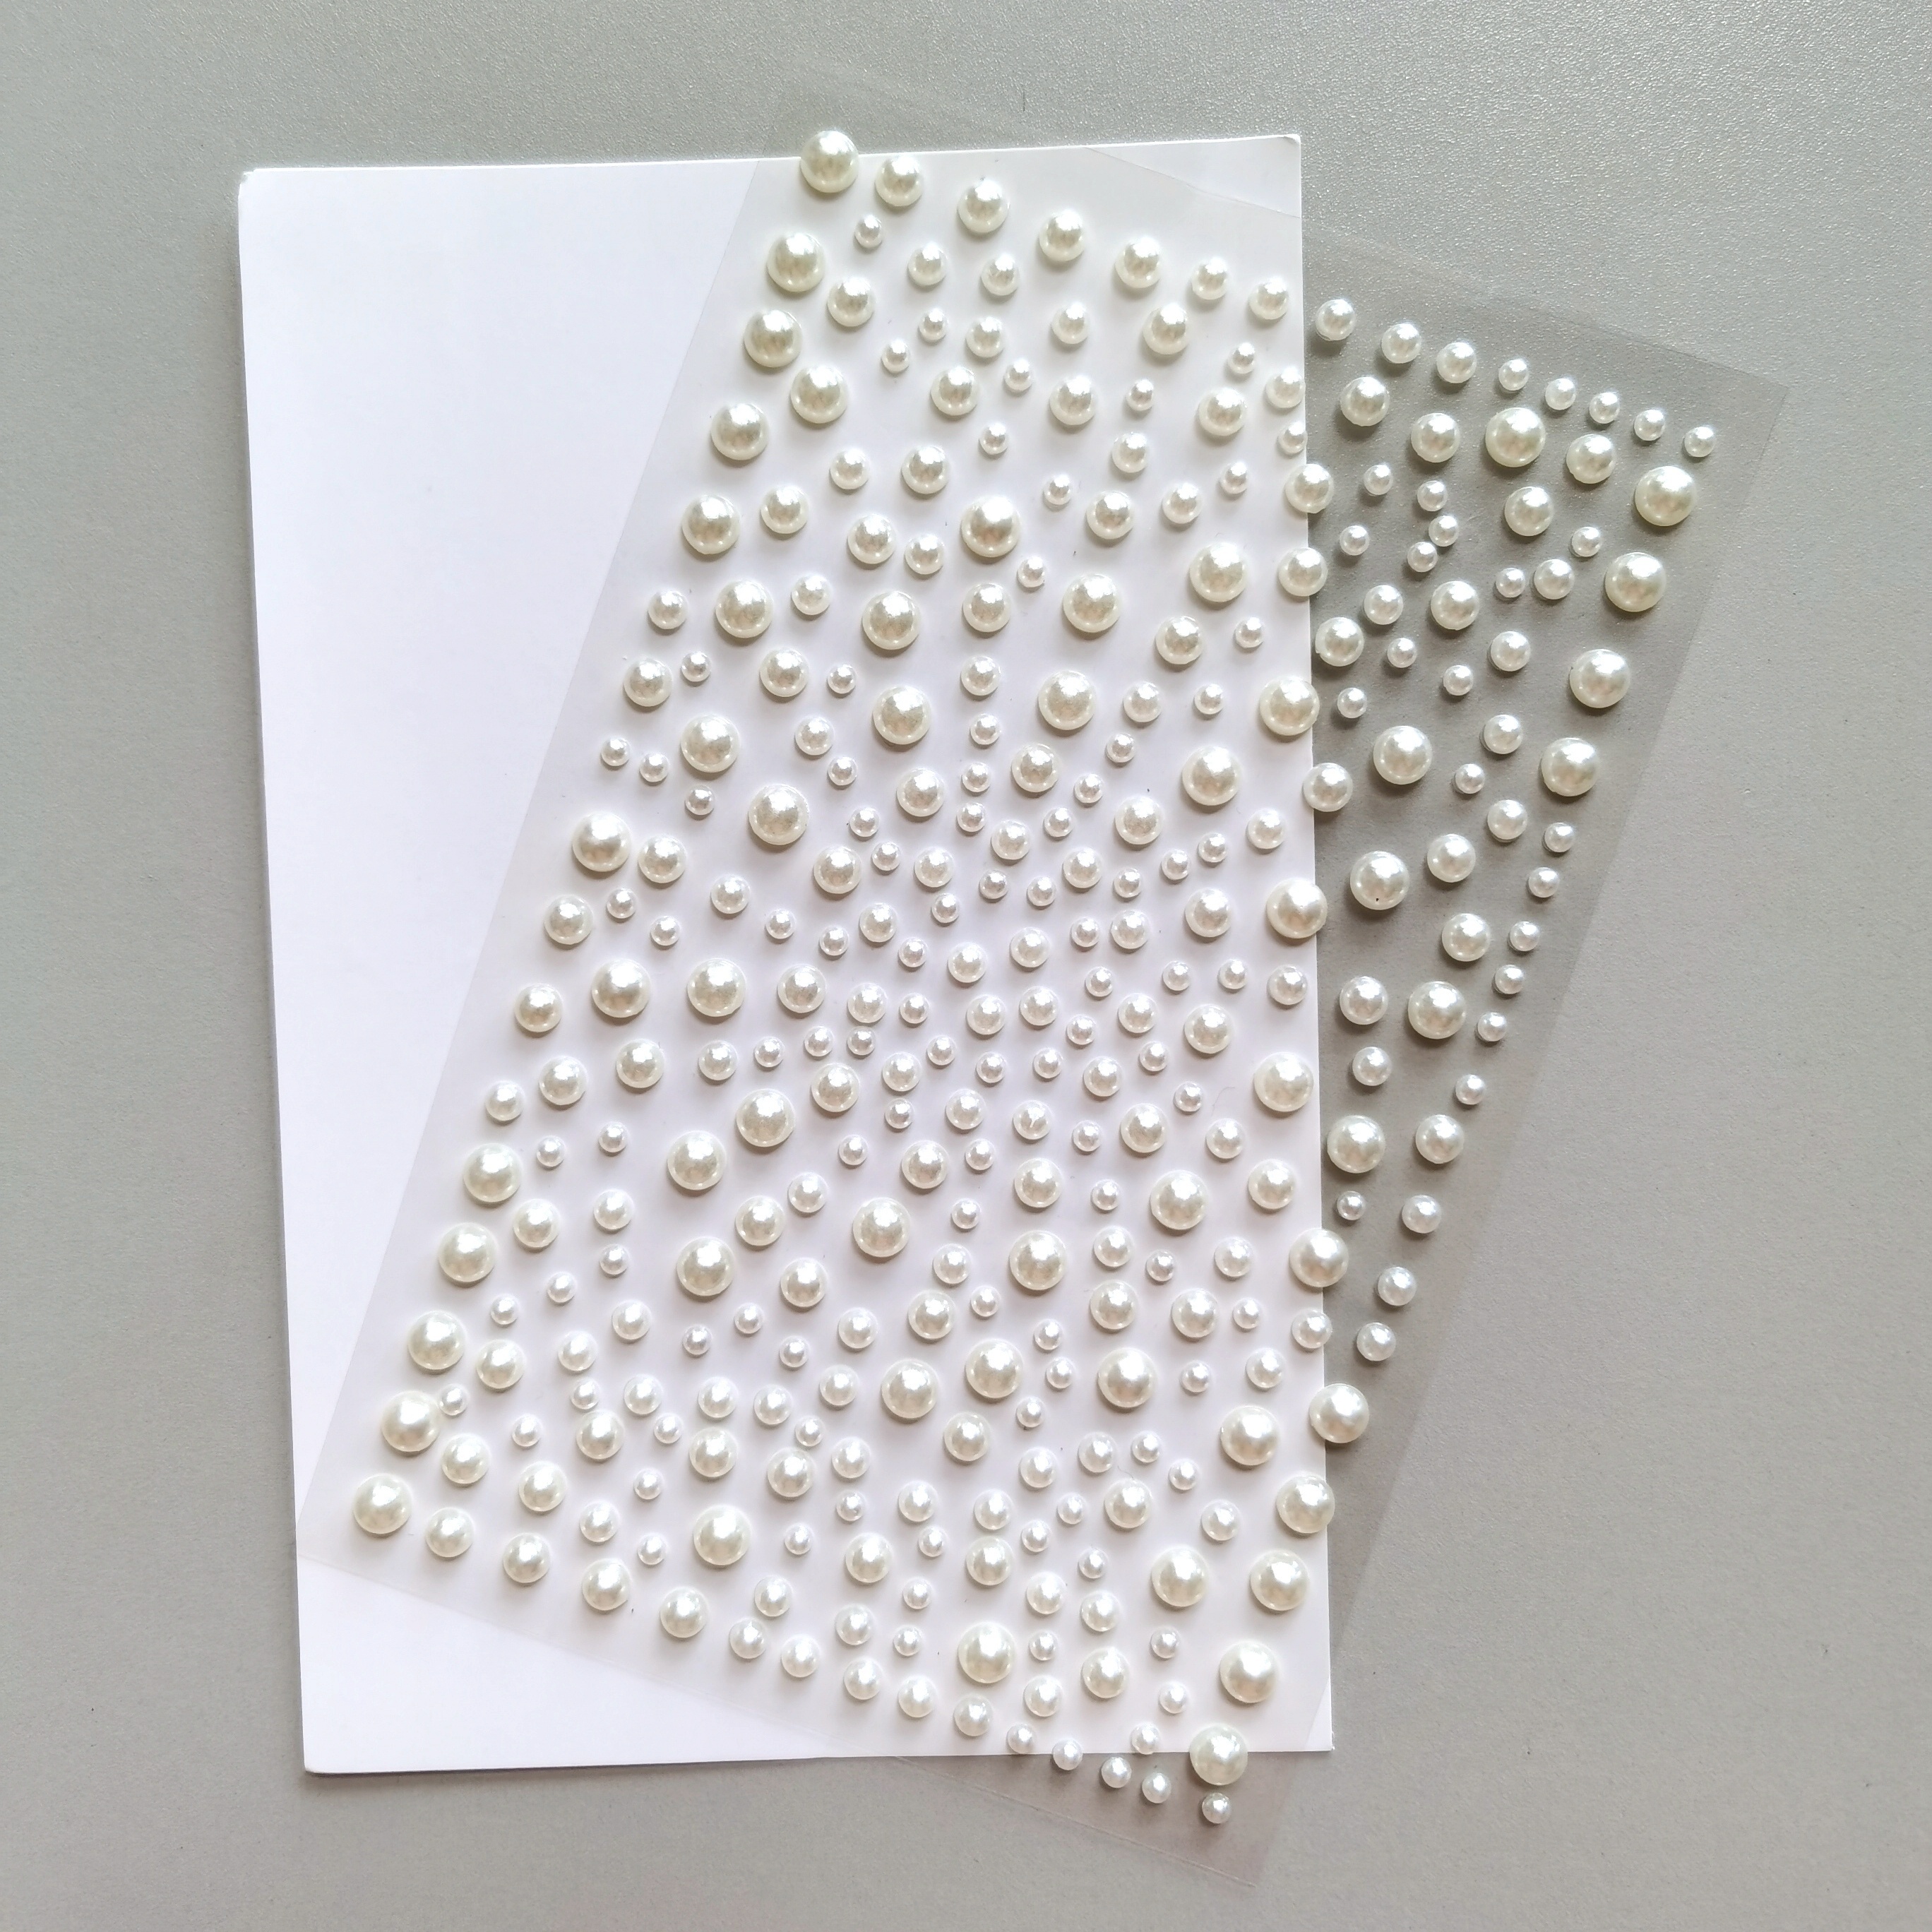 2800 Pcs Self Adhesive Pearl Stickers, White/Ivory Flat Back Pearls Sticker  for Face Beauty Makeup Nail Art Cell Phone DIY Crafts Home Decor  Scrapbooking Embellishments, 3mm/4mm/5mm/6mm